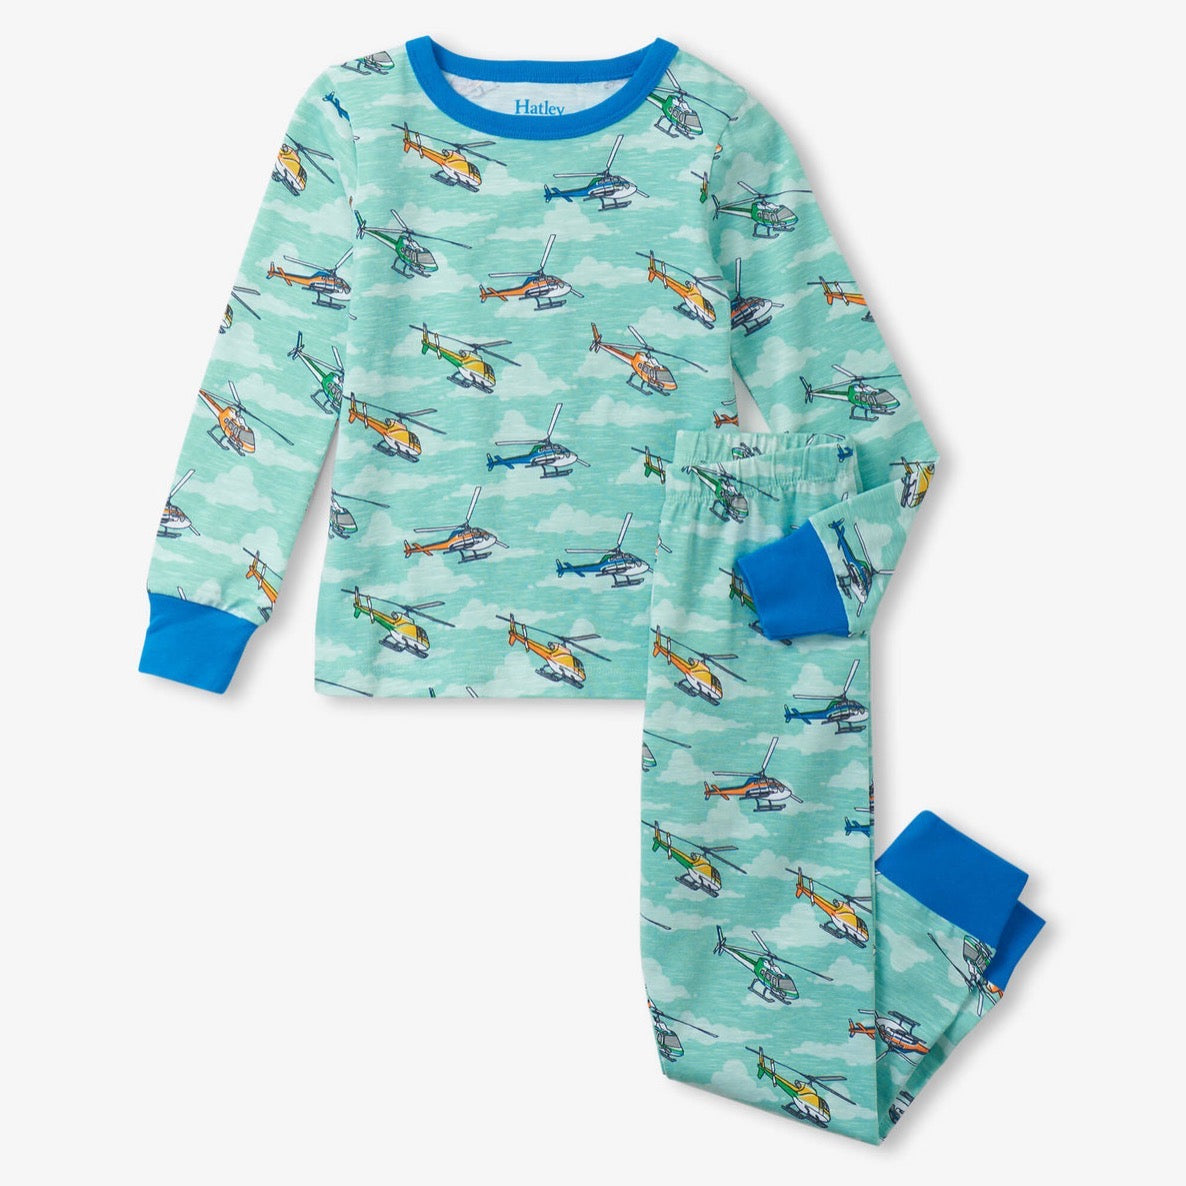 Hatley Helicopters Pj Set S24hhk1789 Clothing 3YRS / Blue,4YRS / Blue,5YRS / Blue,6YRS / Blue,7YRS / Blue,8YRS / Blue,10YRS / Blue,12YRS / Blue